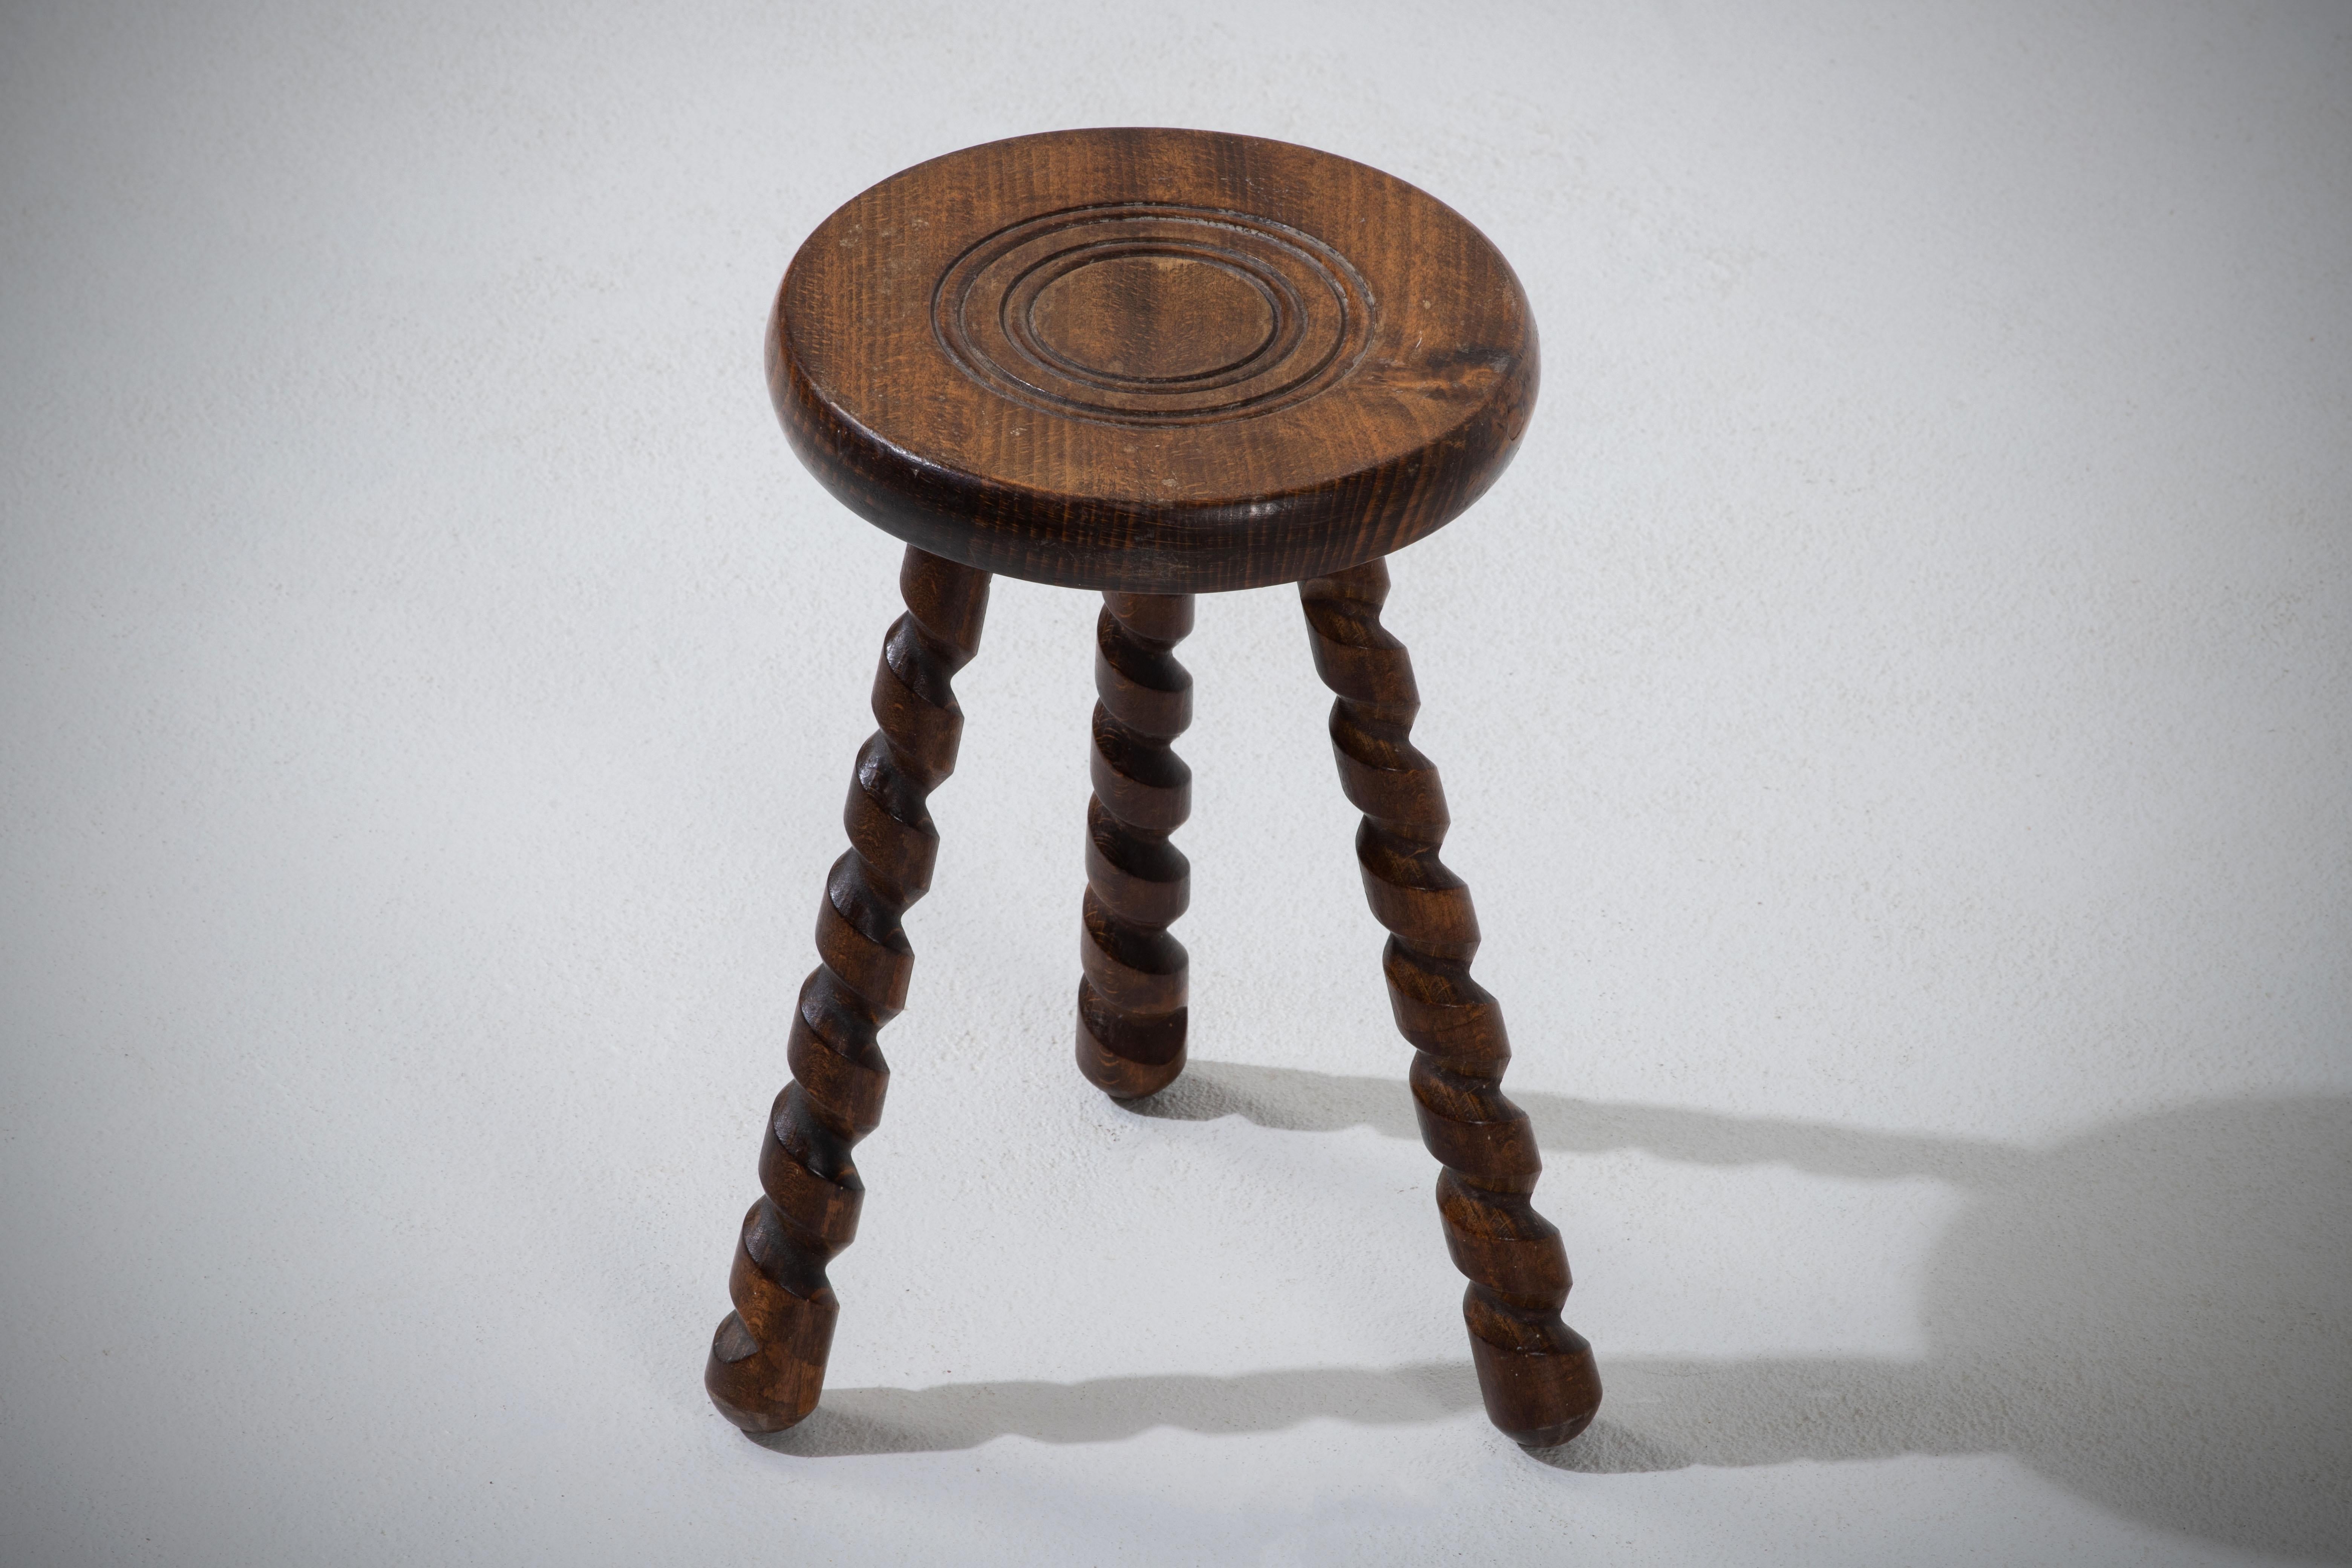 Hand-Carved Charming Oak Stool with Barley Twist Legs, 1950s, France